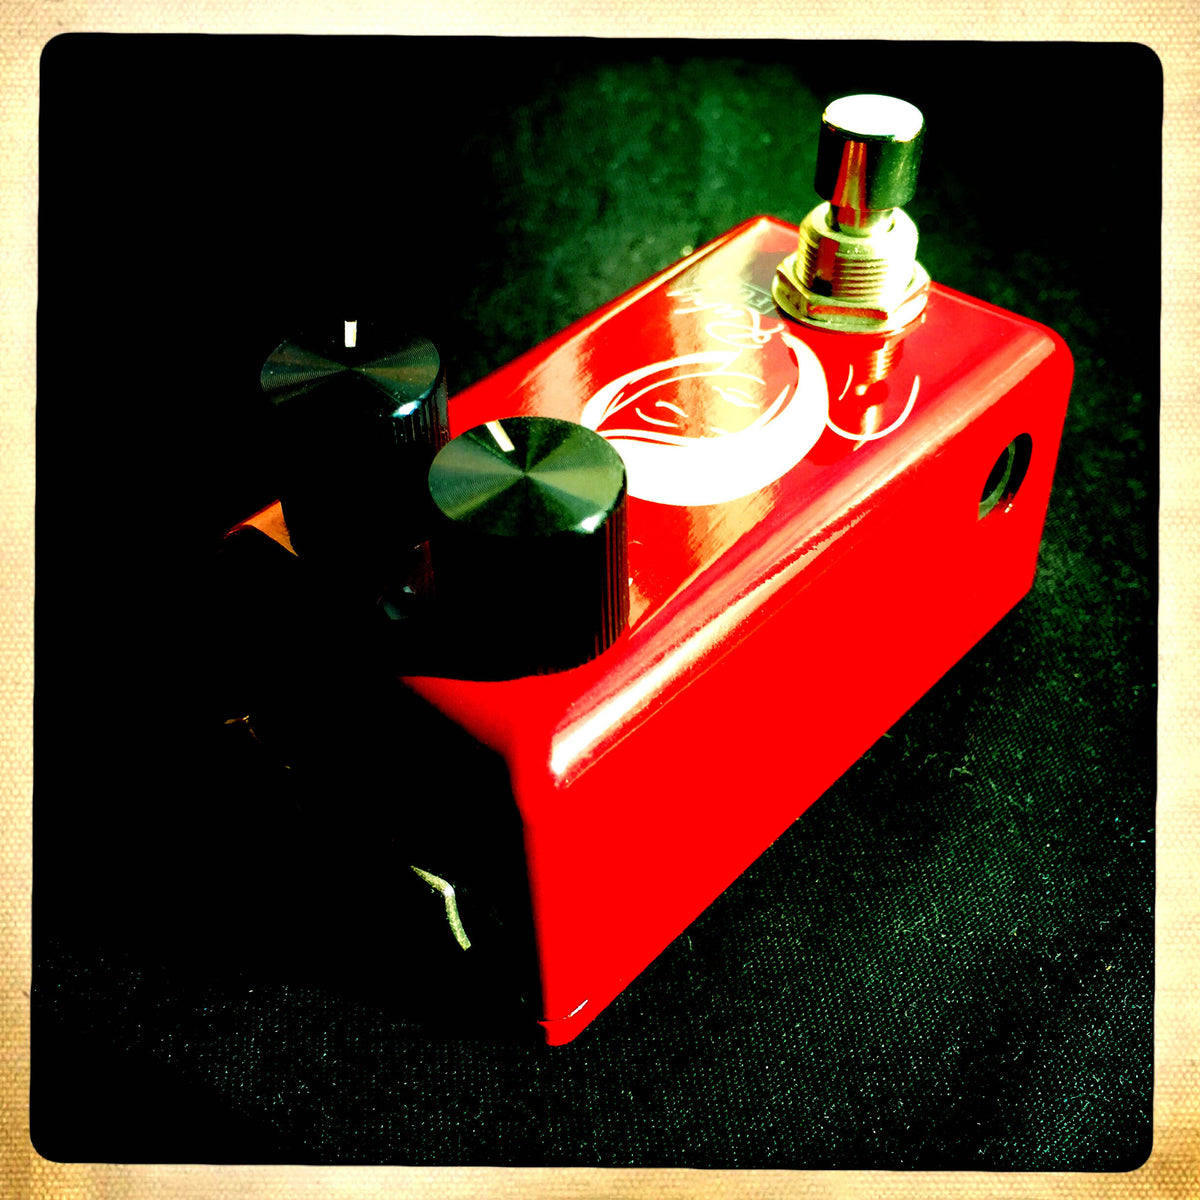 Seven Sisters Ruby Fuzz